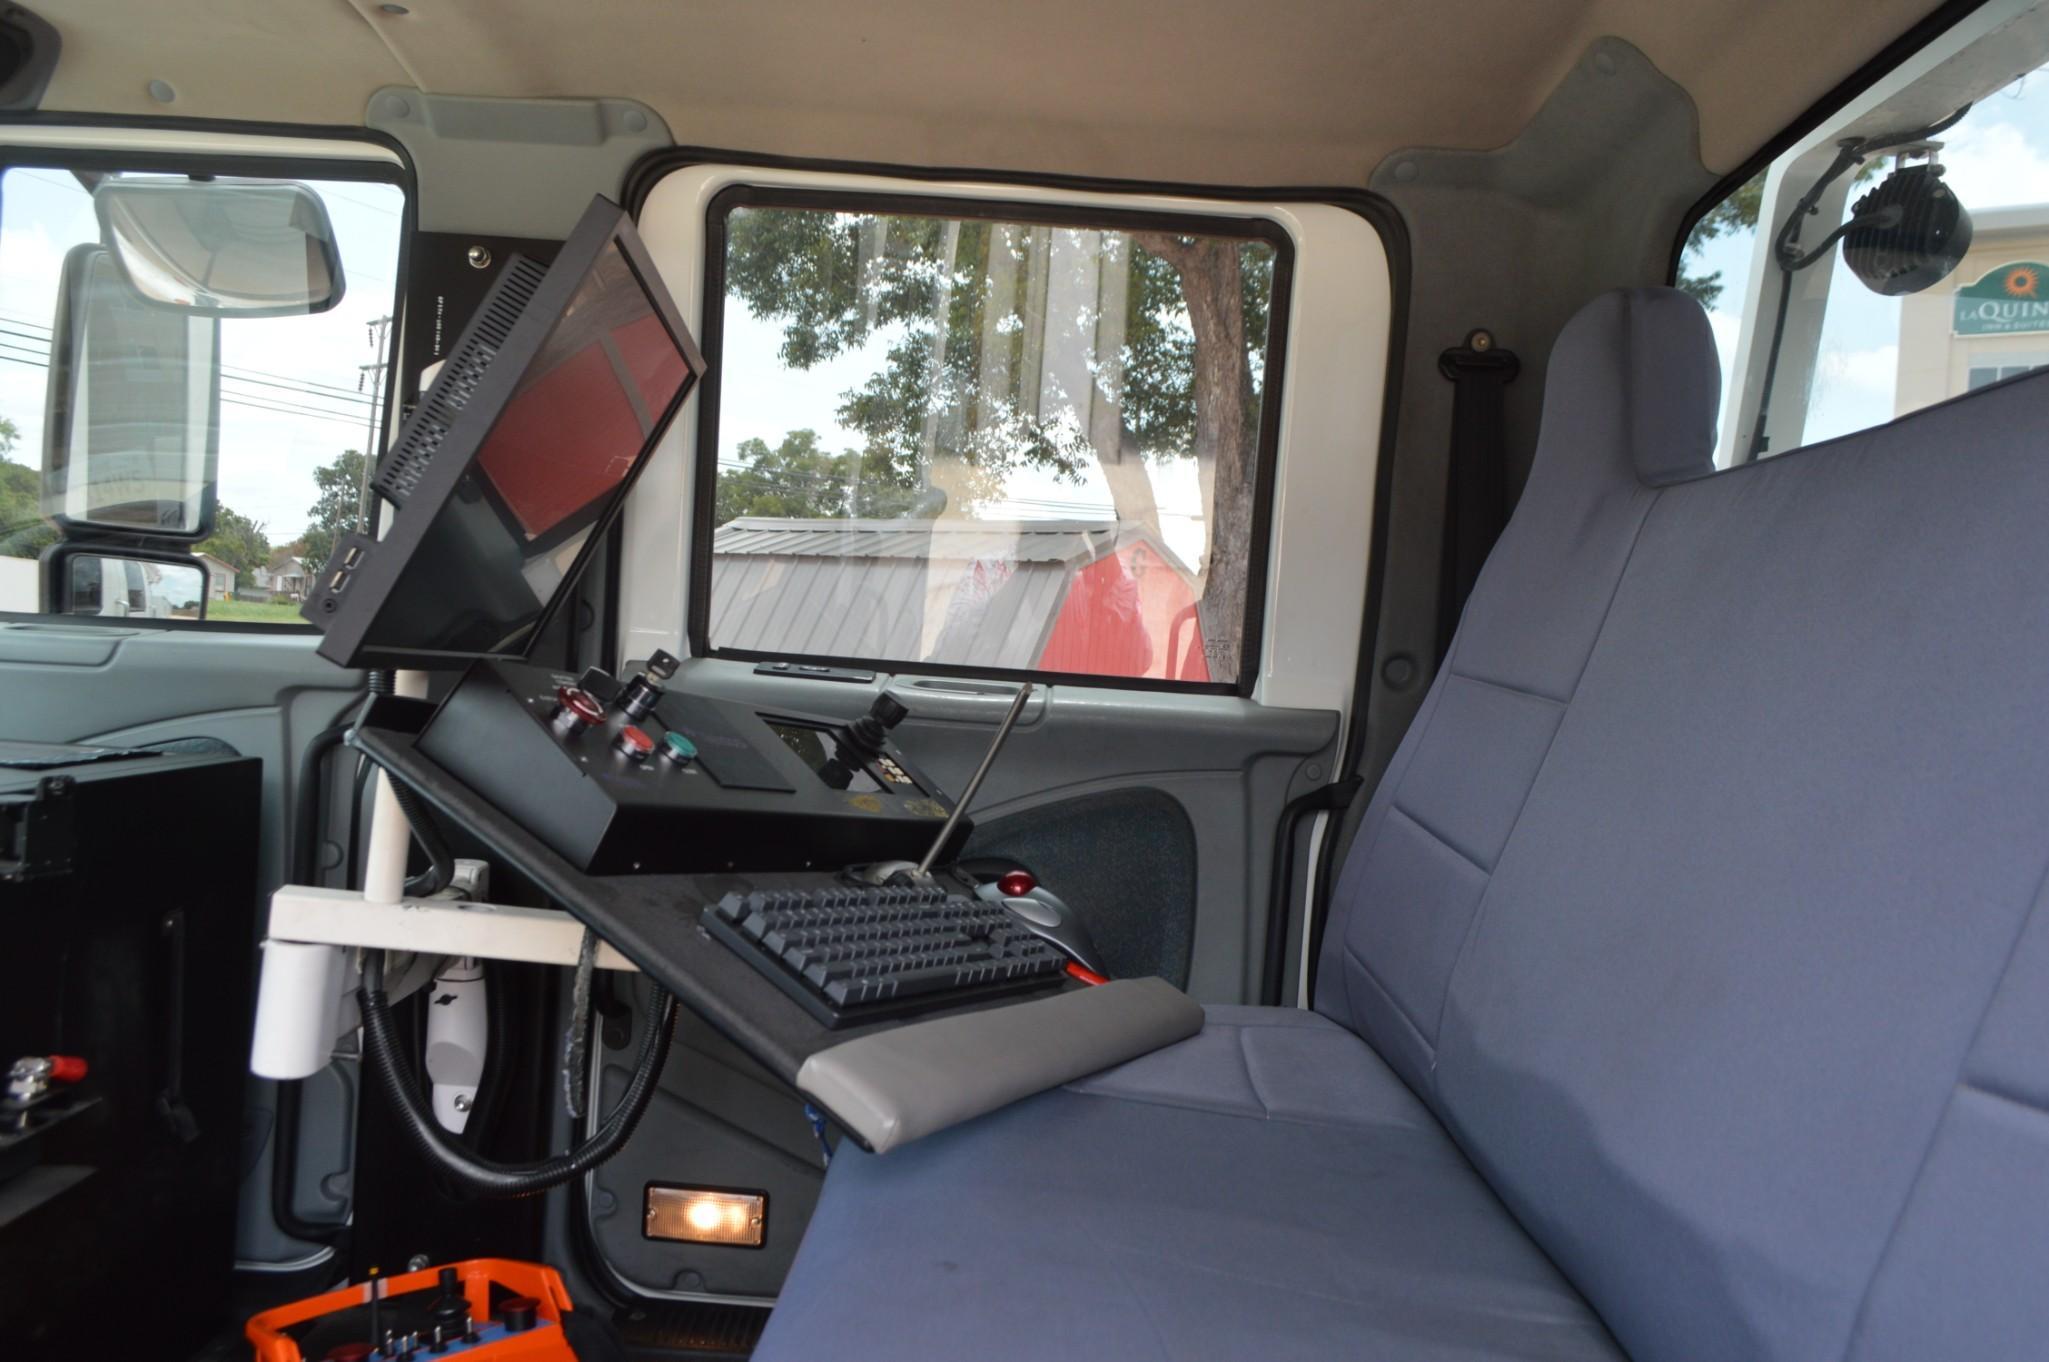 2003 VACIS International 4300 Truck with Mobile Inspection System, Diesel, 4 Door